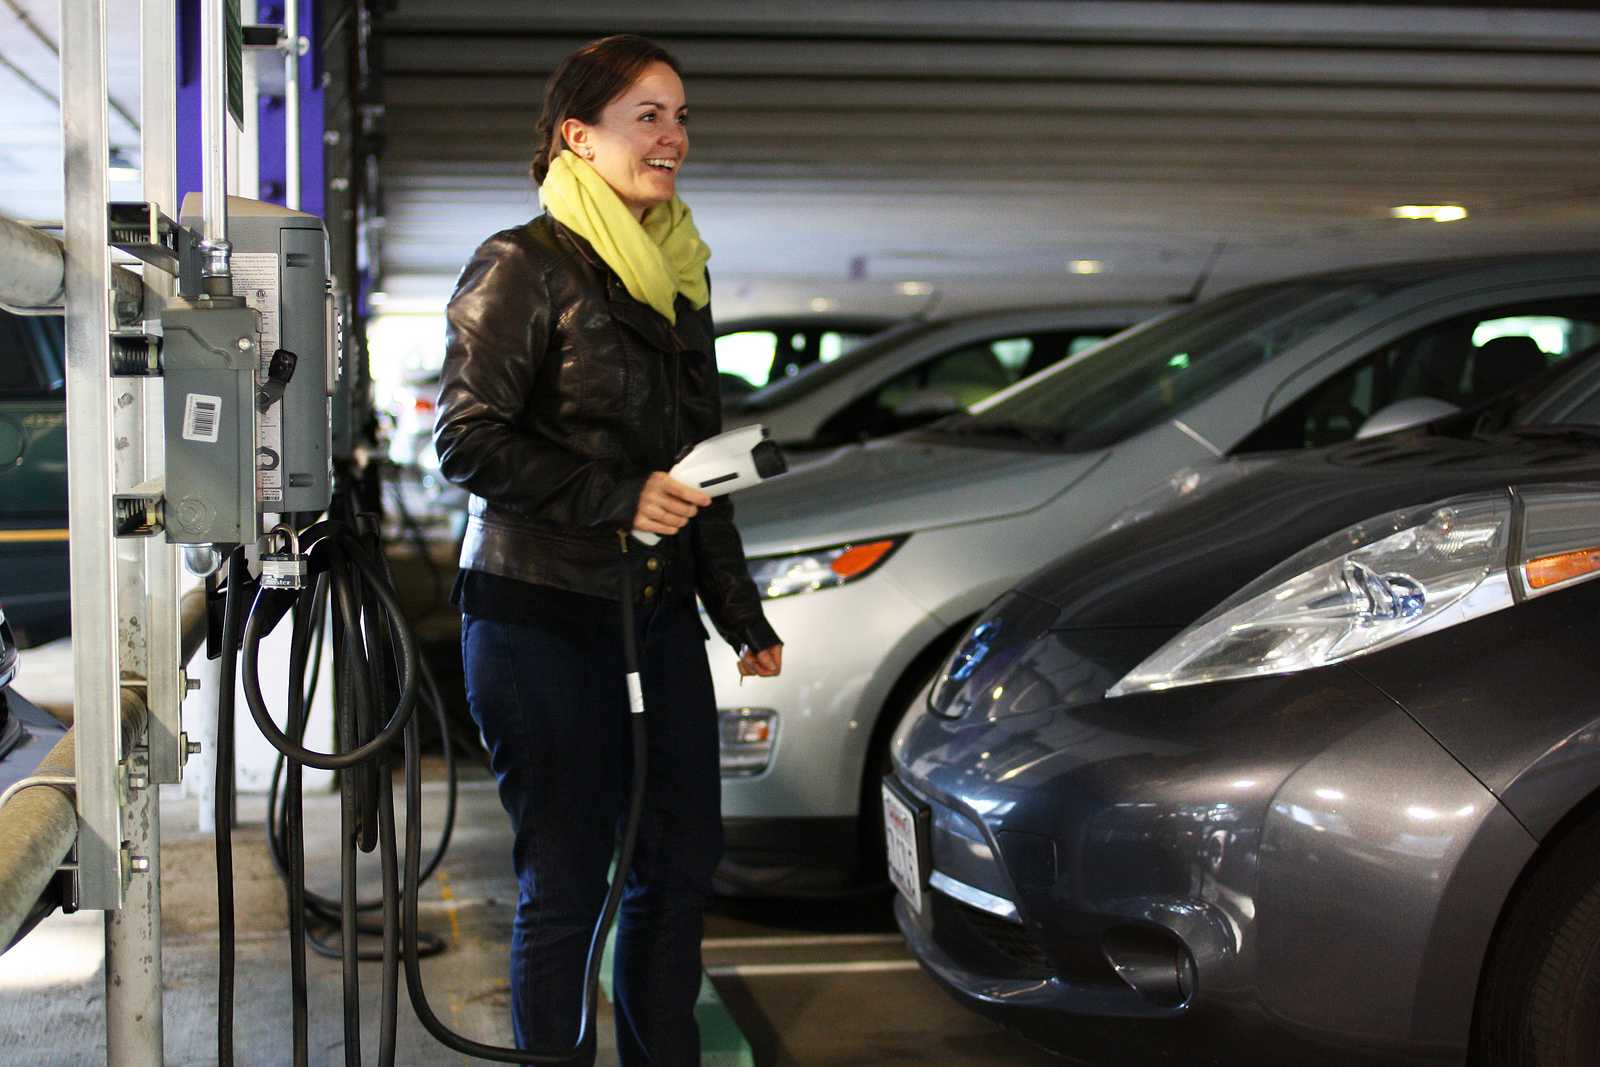 Kinesiology professor Marcia Abbott unplugs her car from the free electric charging stations on the first floor of the parking lot, located near the elevator Oct. 10, 2013. Photo By Tony Santos / Xpress